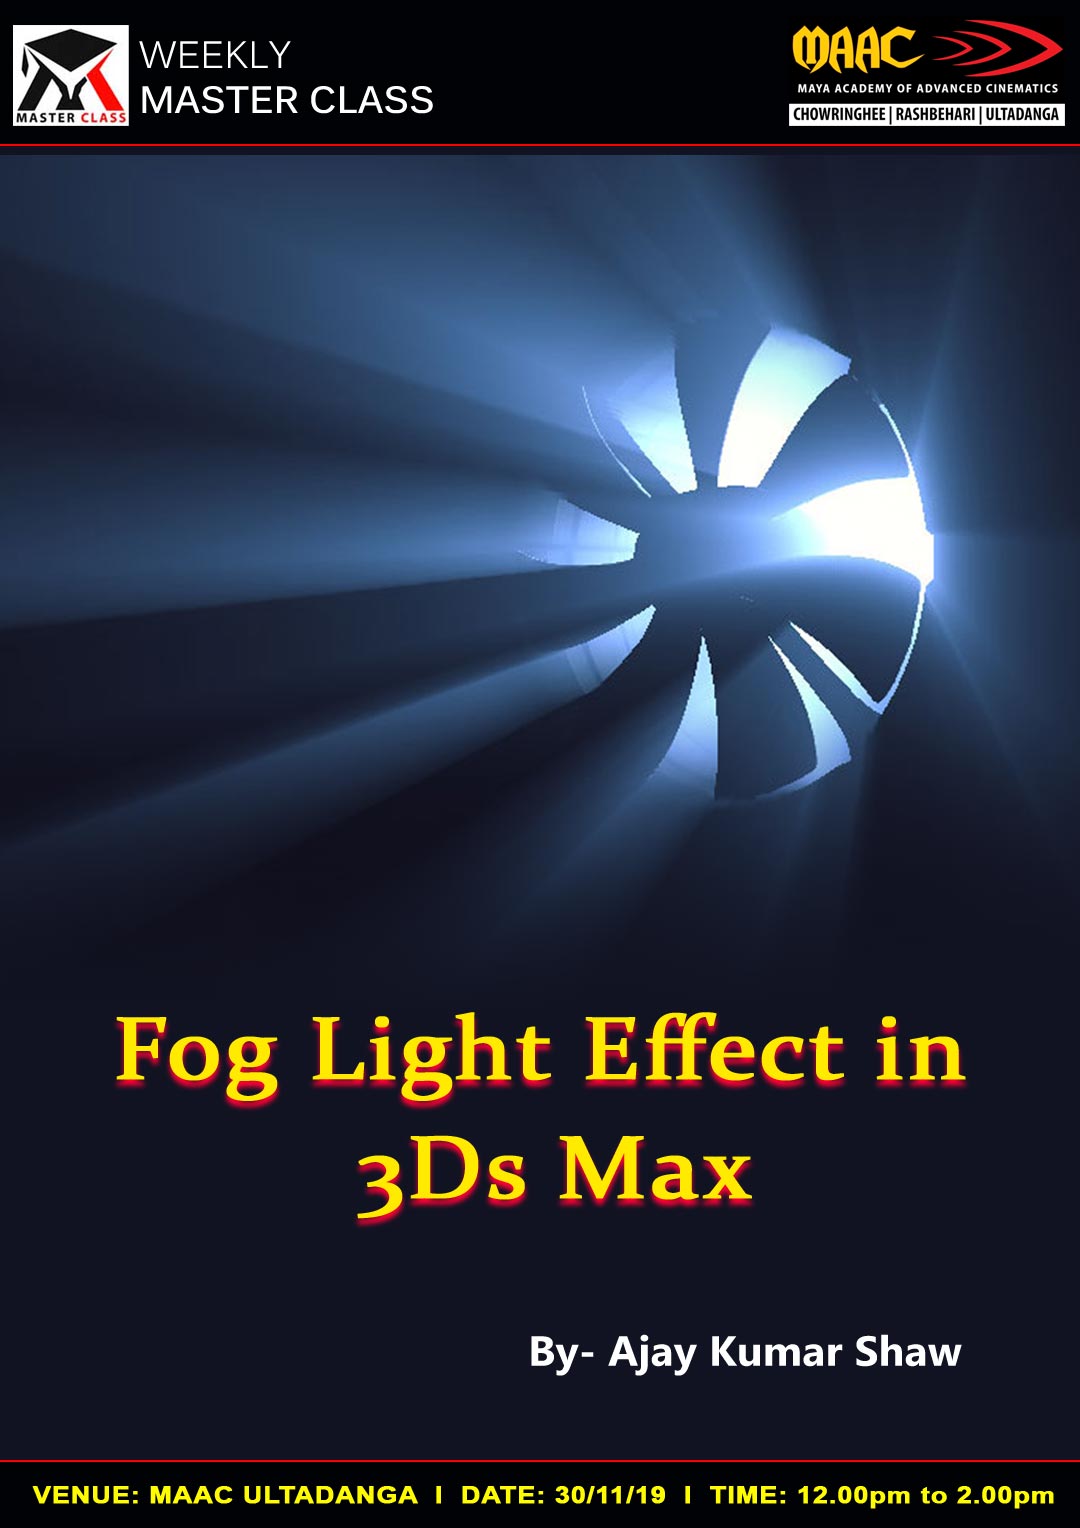 Weekly Master Class on Fog Light Effect in 3Ds Max